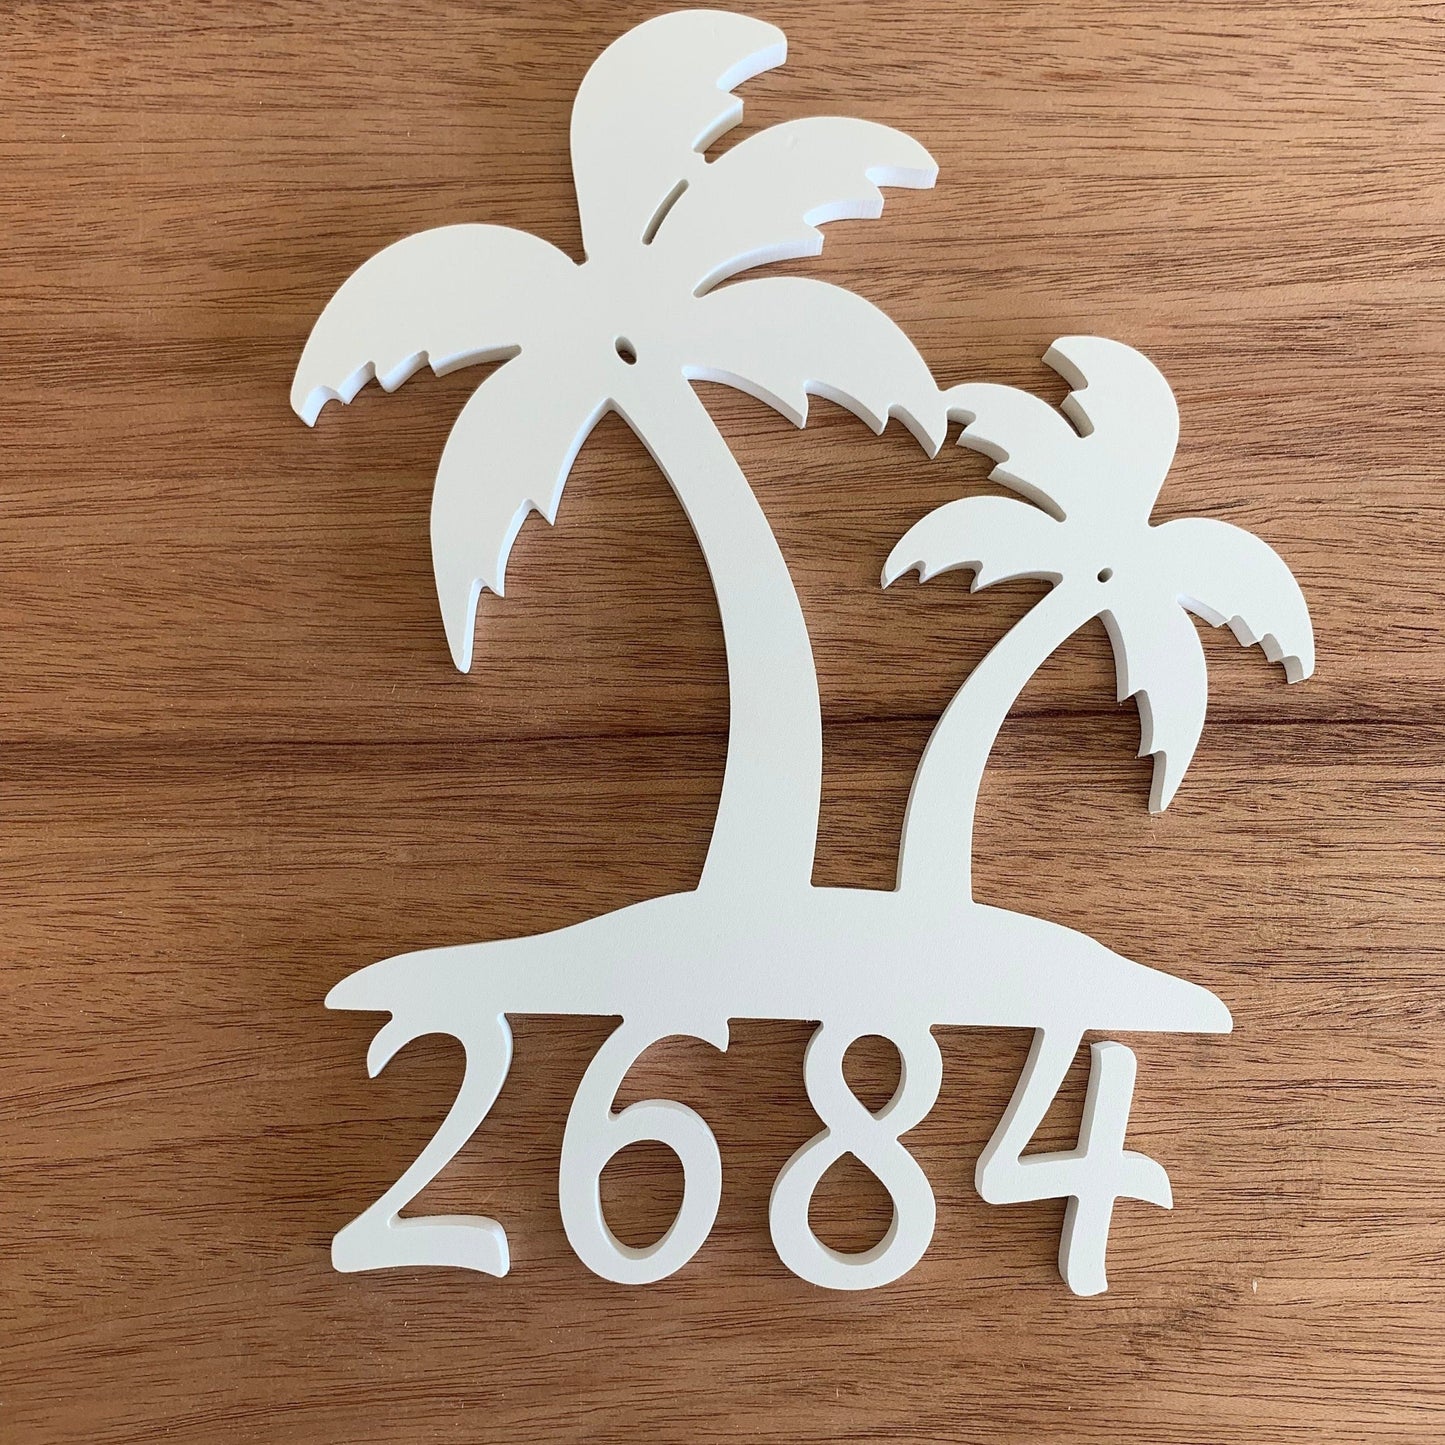 House Number Sign, Palm Trees, Address Plaque, Address Sign, Custom, Personalized Sign, Housewarming Gift, Coastal, Tropical, Outdoor Decor